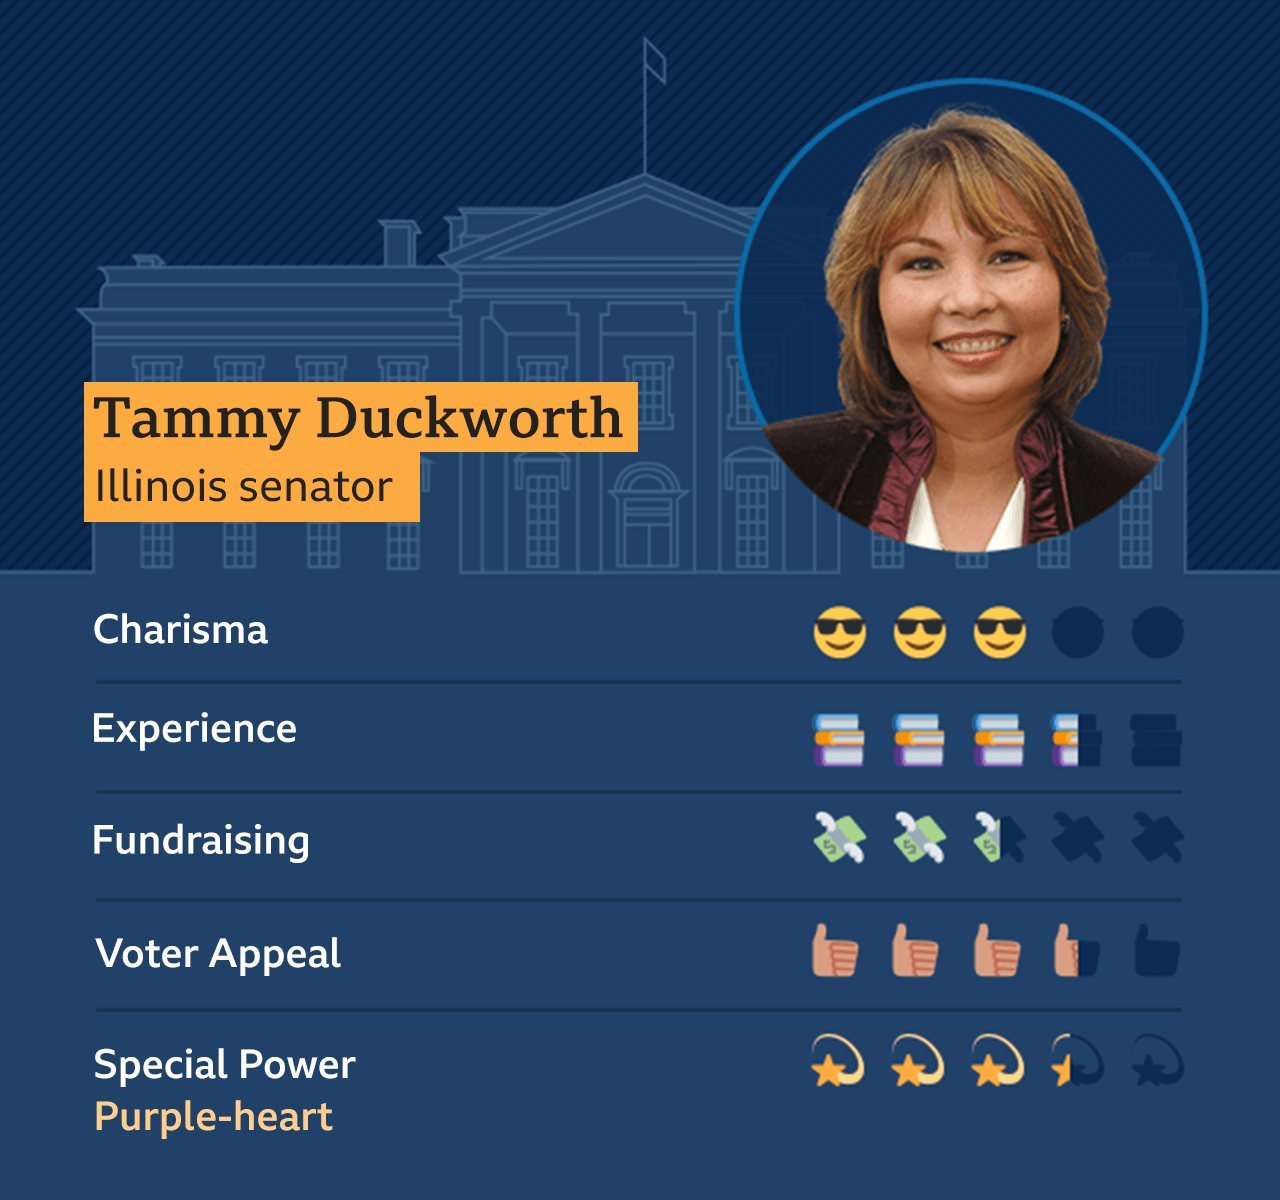 Graphic showing Tammy Duckworth, Illinois Senator: Charisma - 3, Experience 3.5, Fundraising - 2.5, Voter appeal - 3.5, Special Power - Purple-heart - 3.5